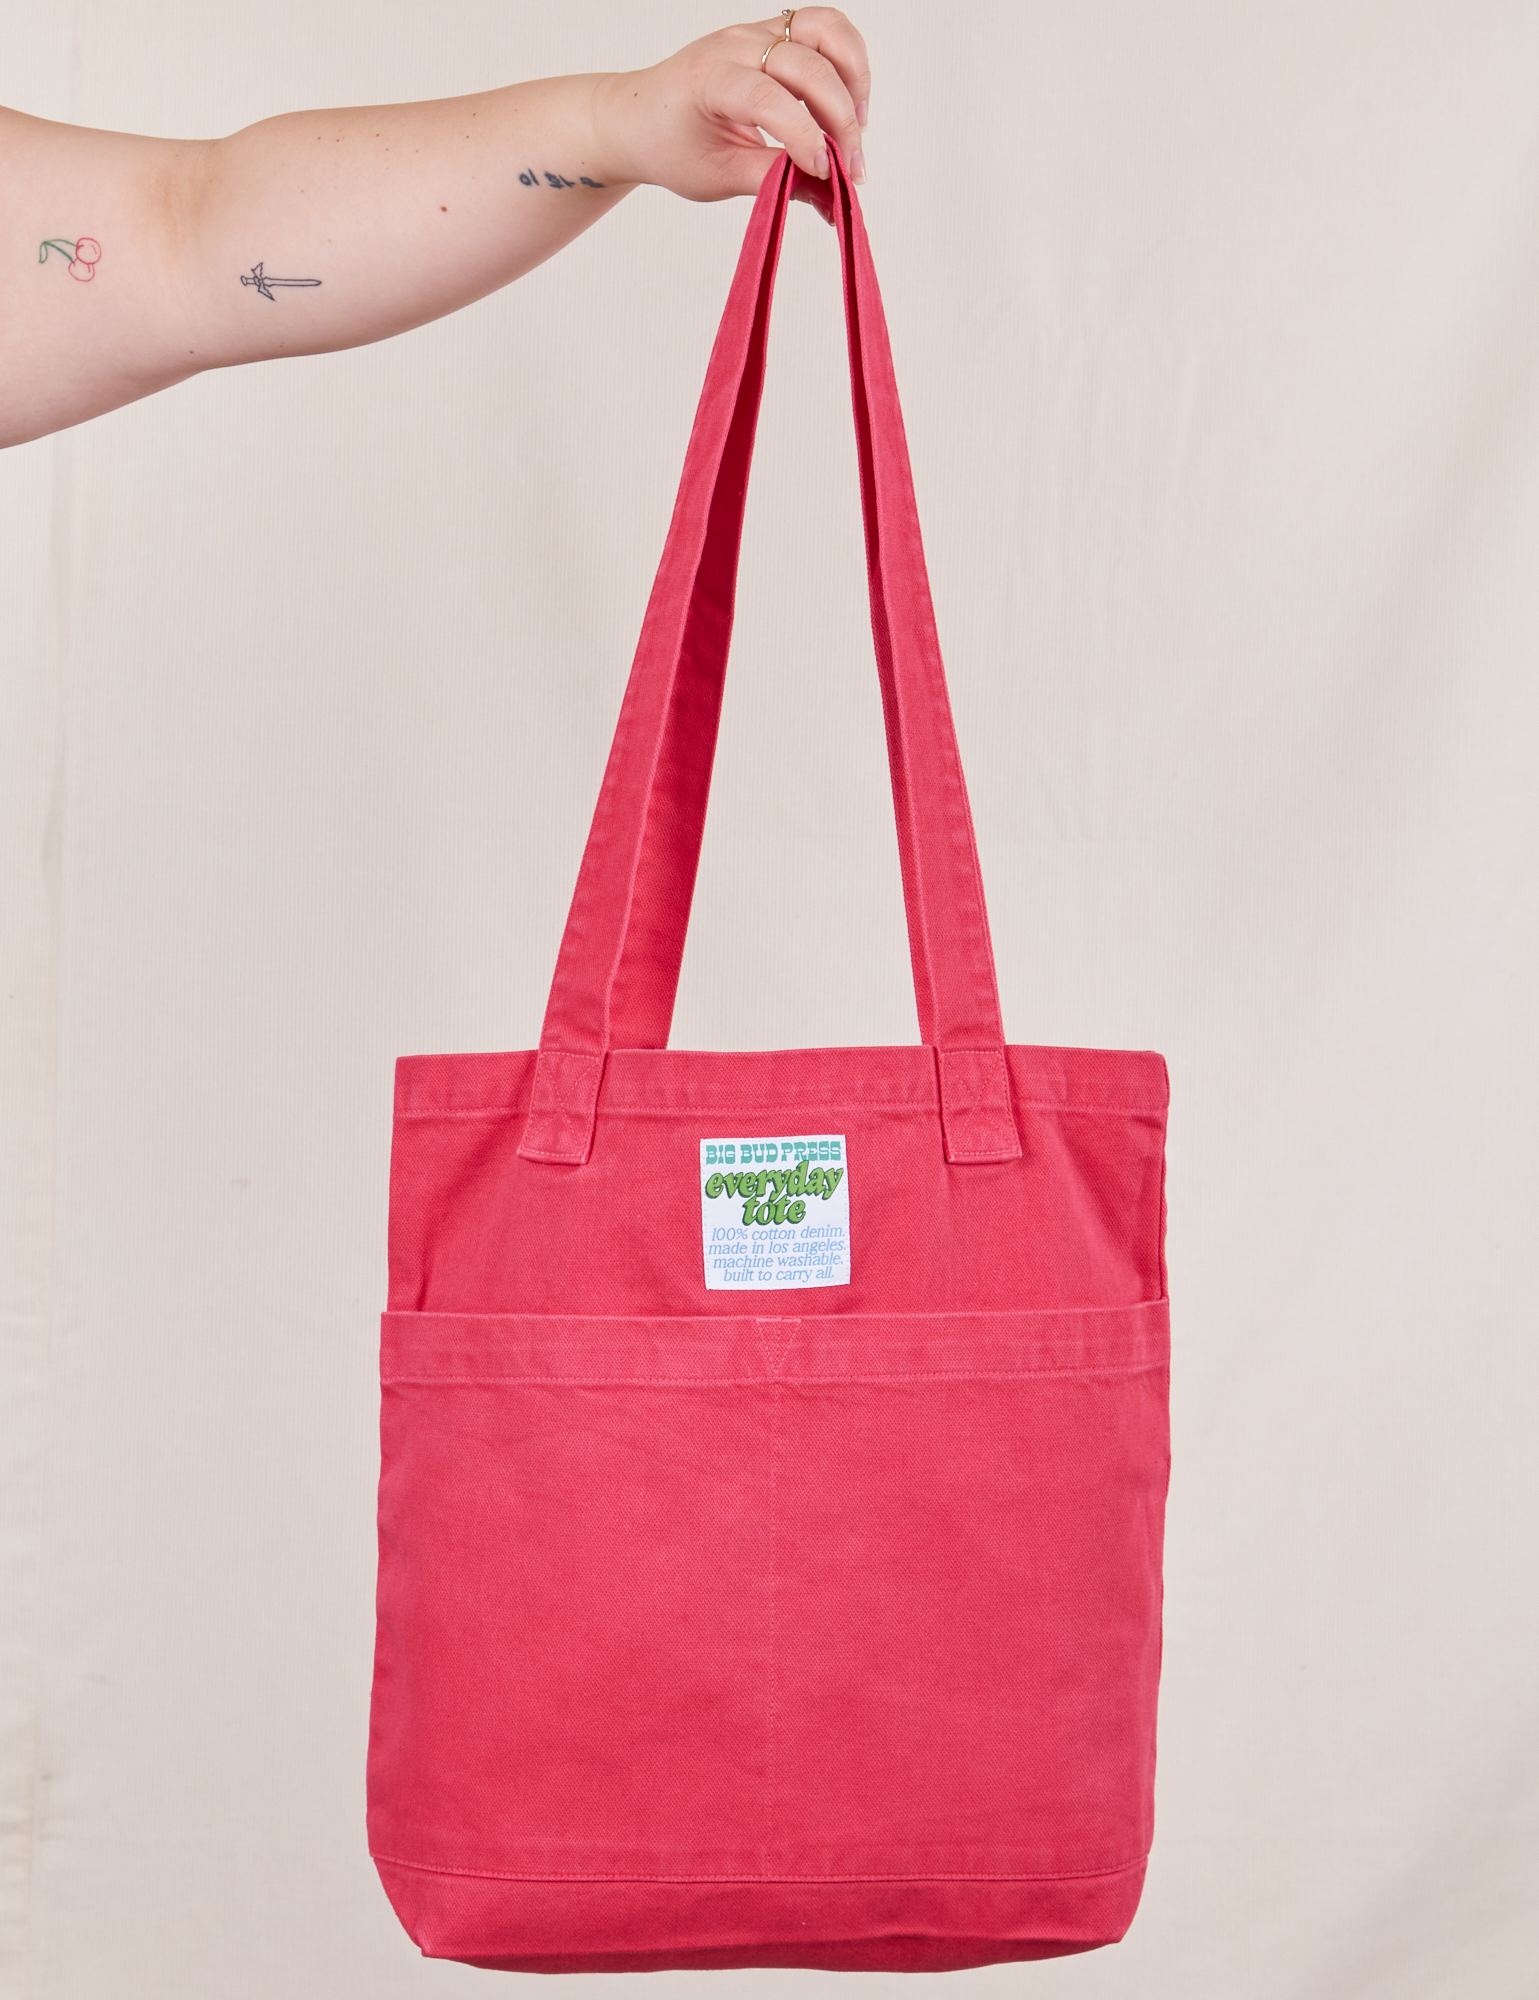 Everyday Tote Bag in Hot Pink